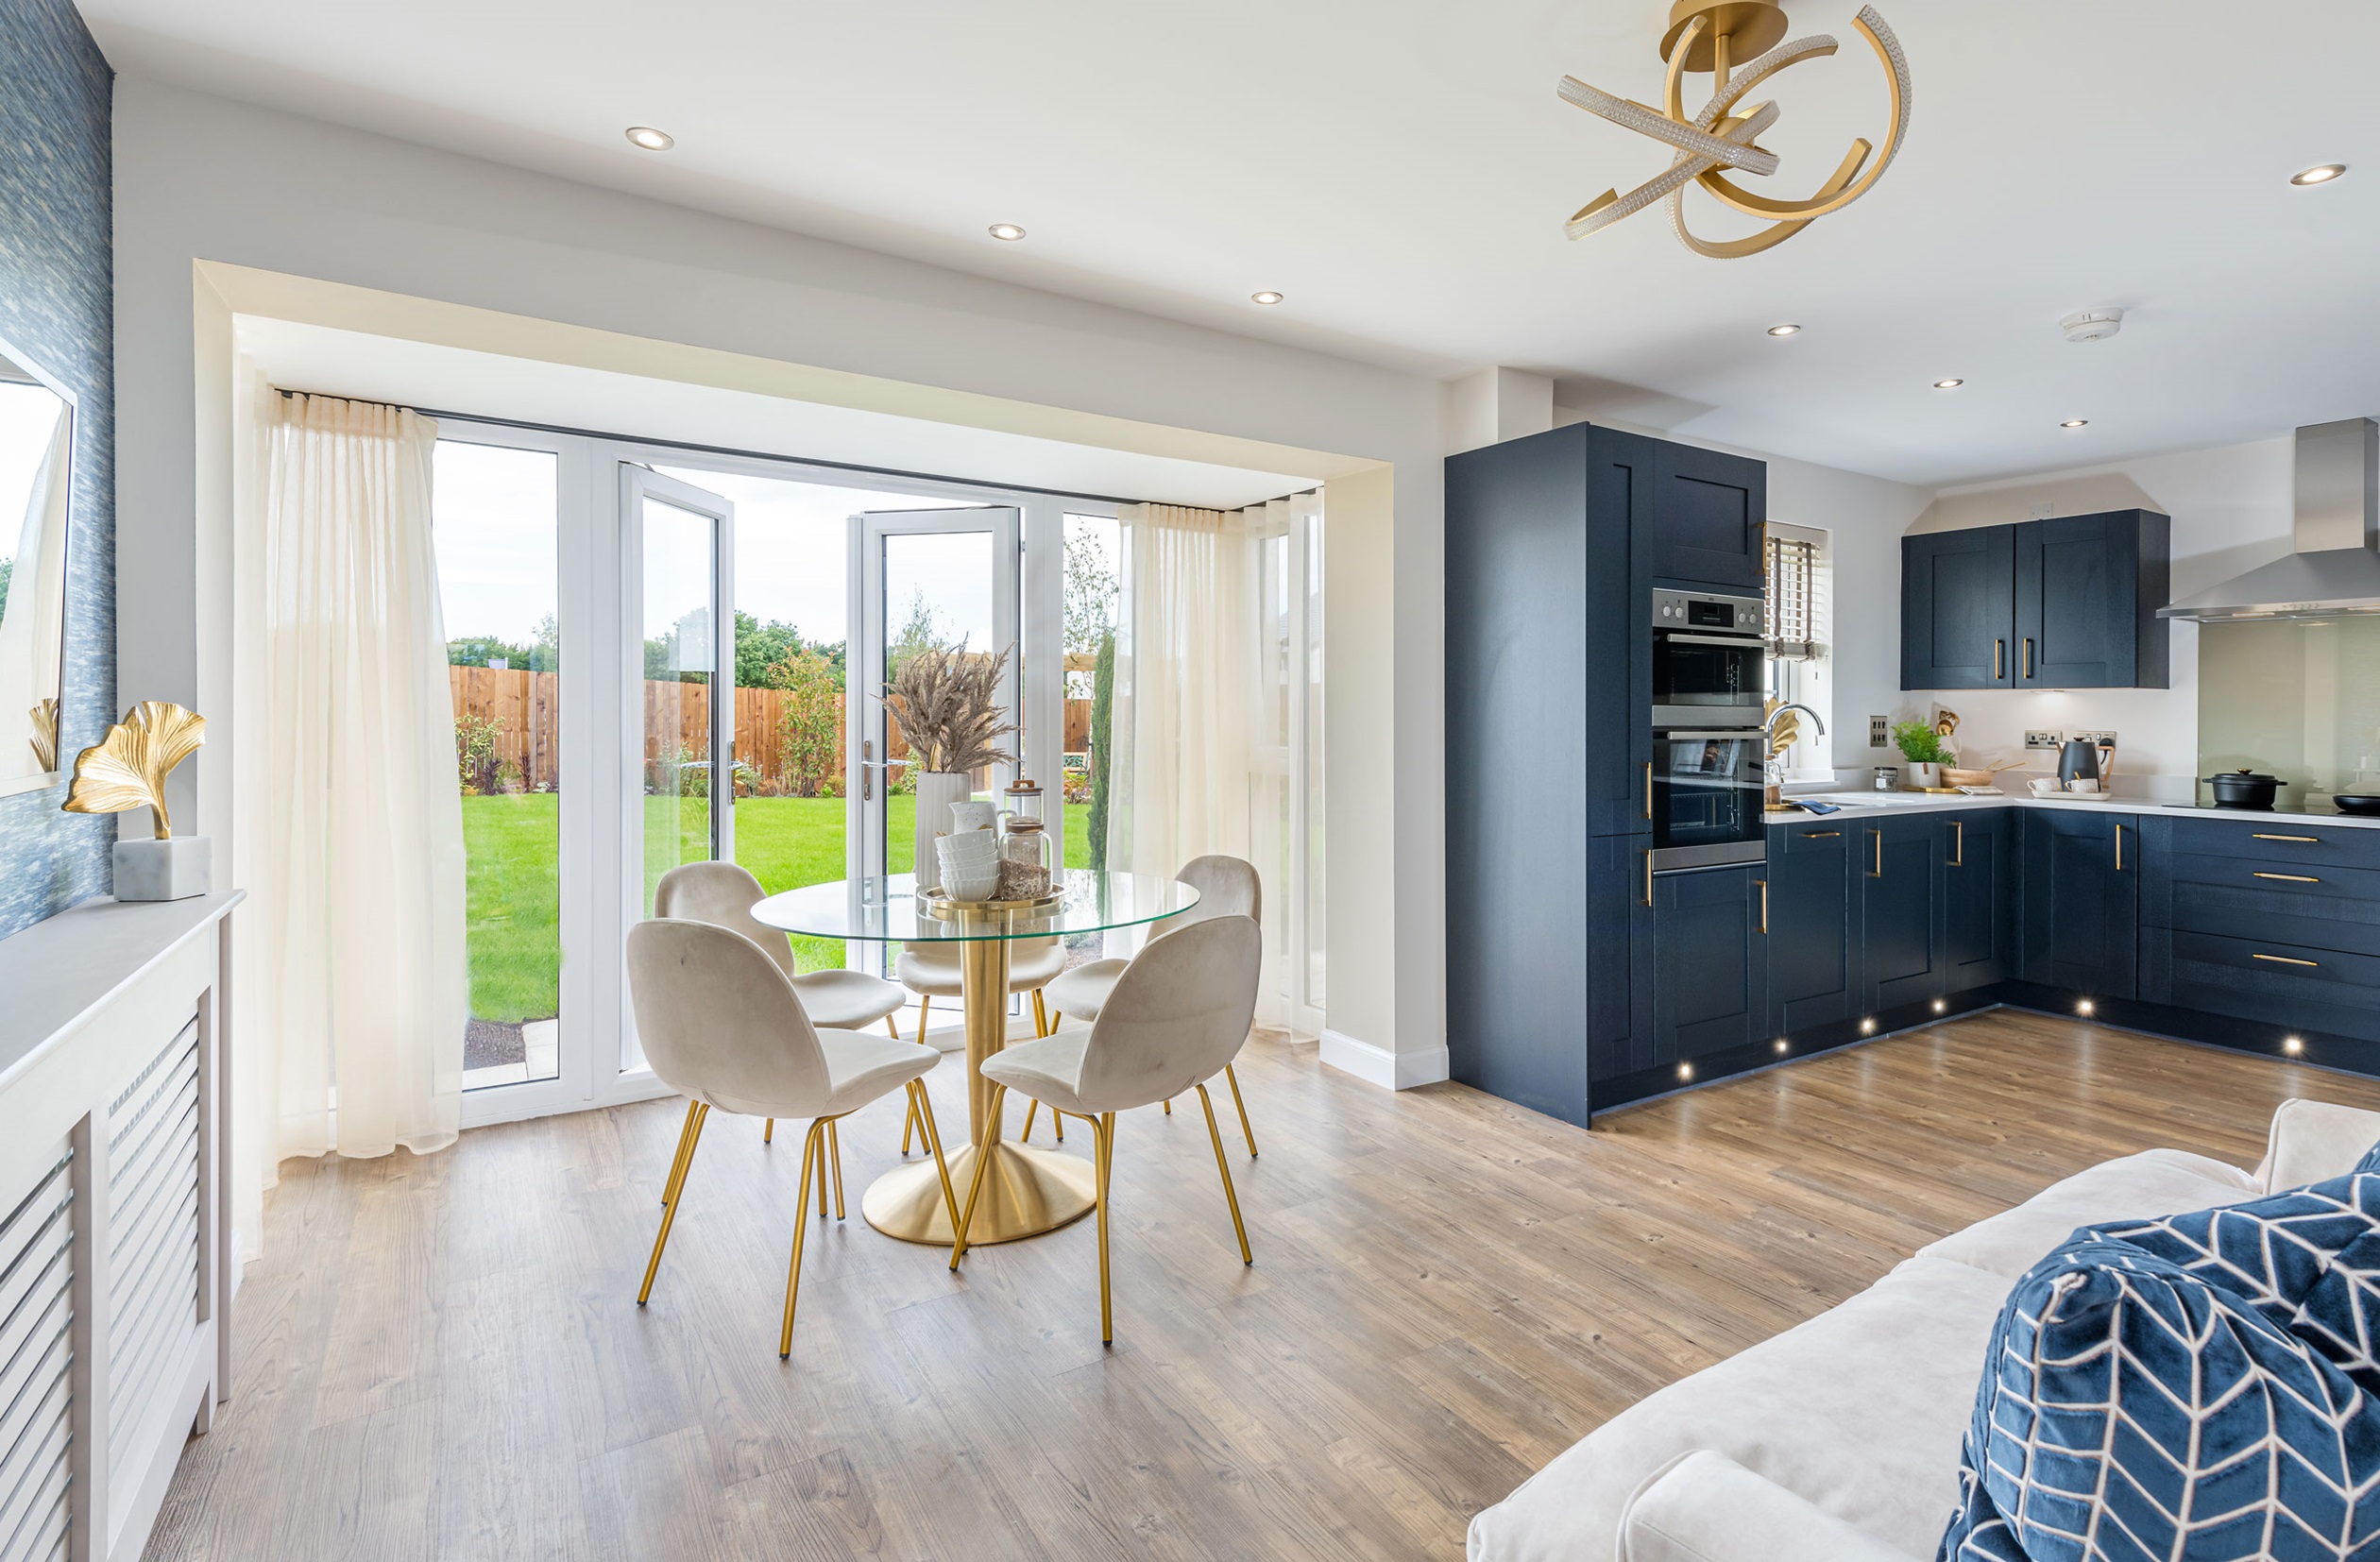 Property 2 of 10. Kitchen/Dining Room In Glenbervie Show Home